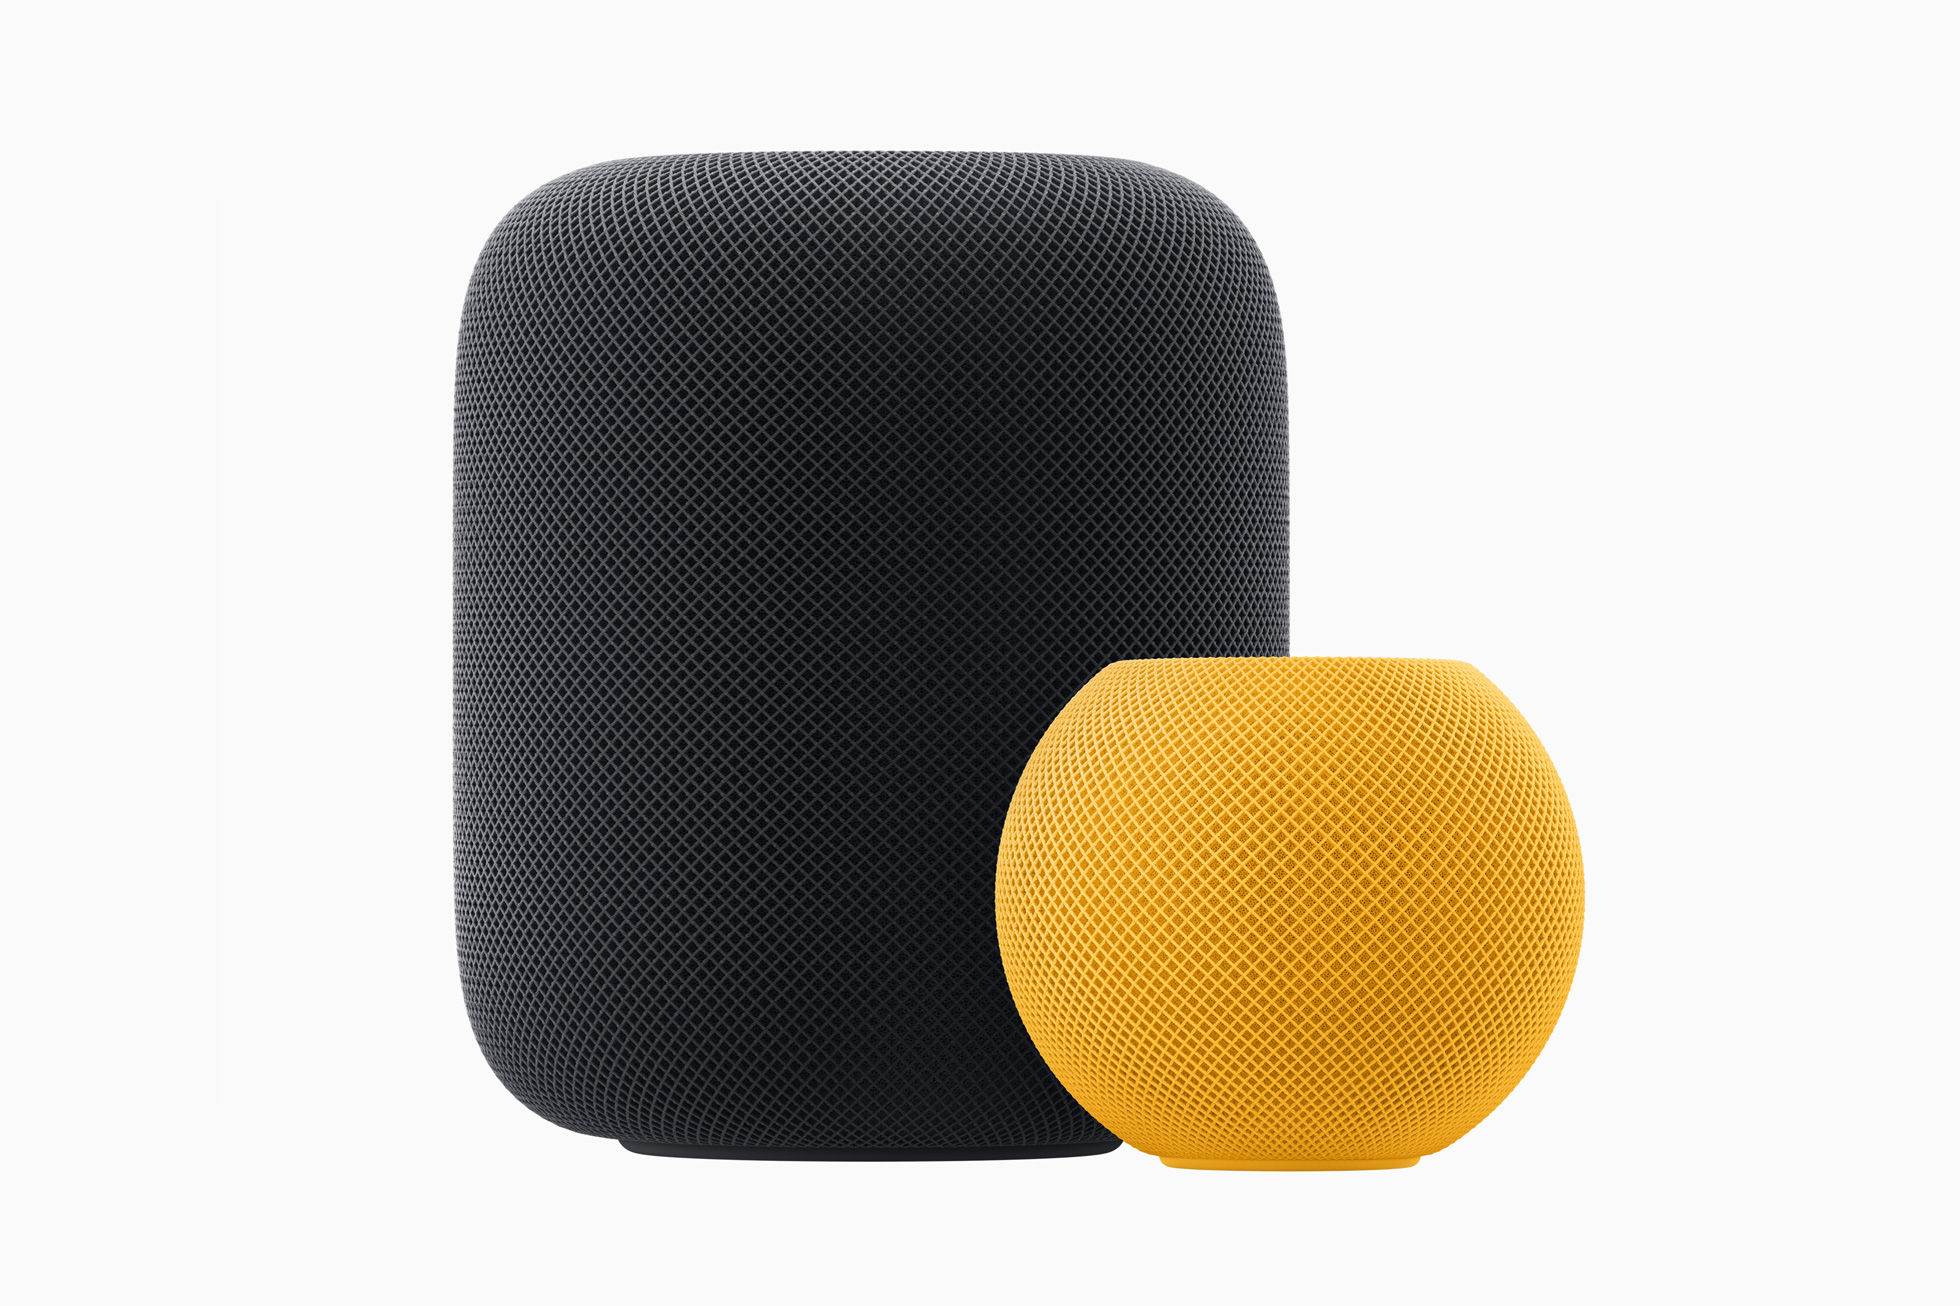 Review: Are the Apple HomePod and HomePod mini worth it?